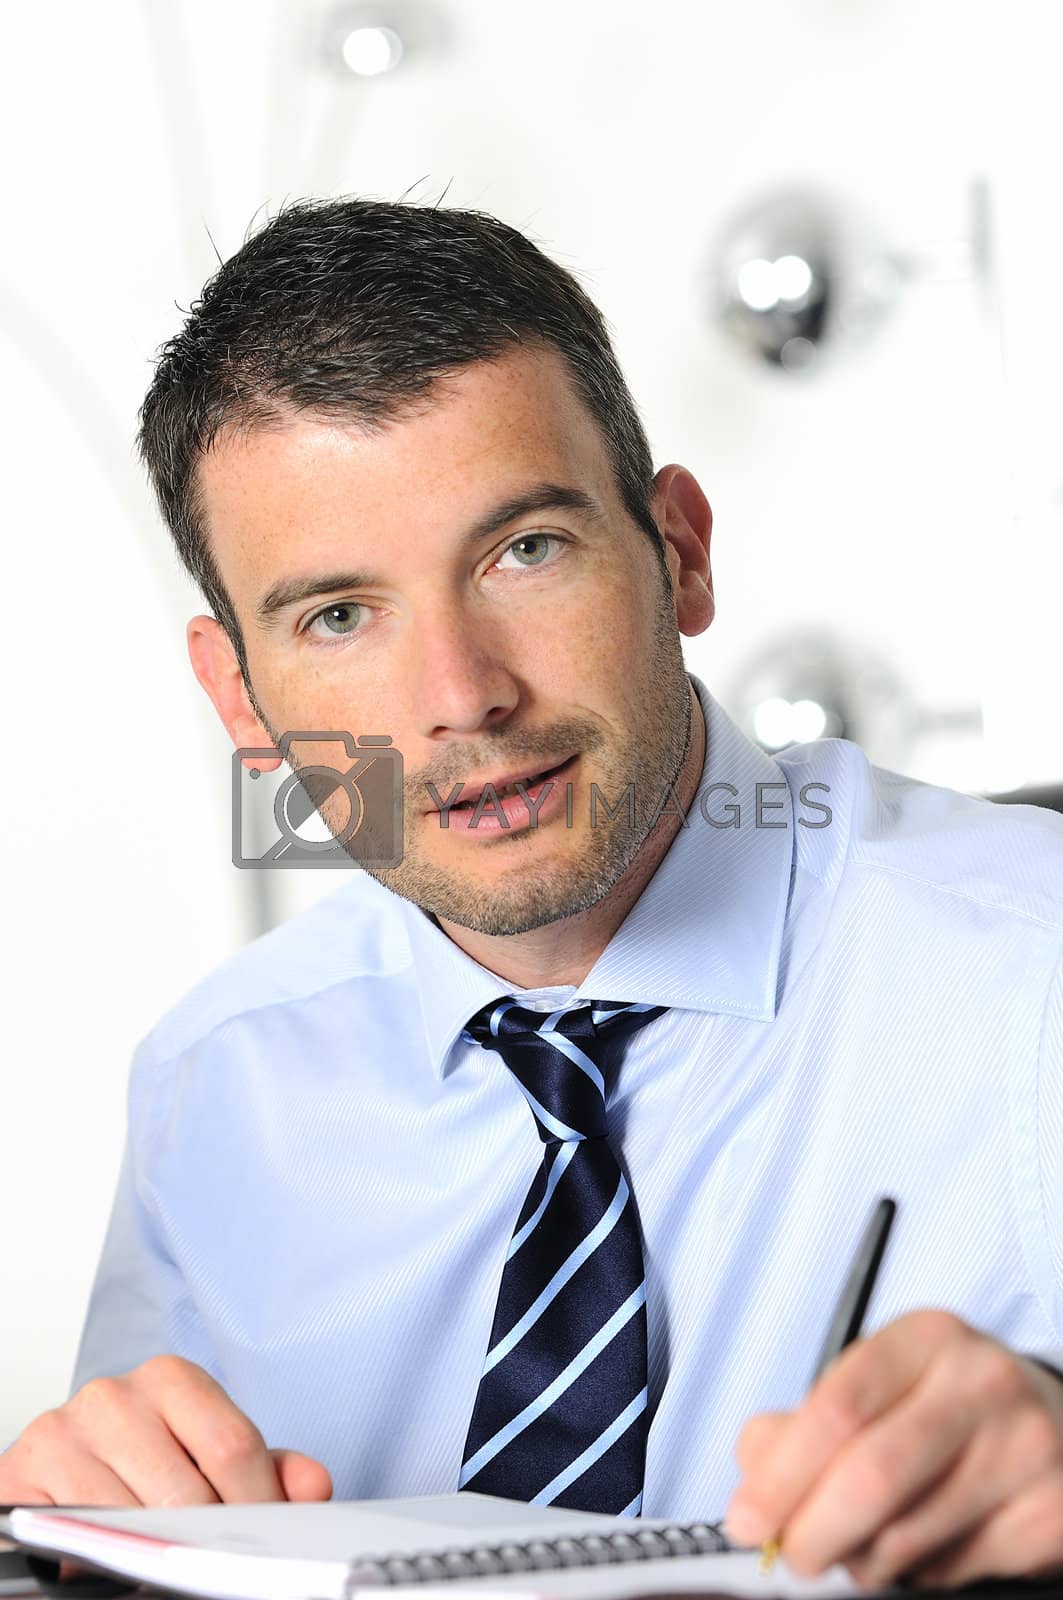 Royalty free image of serious businessman by ventdusud